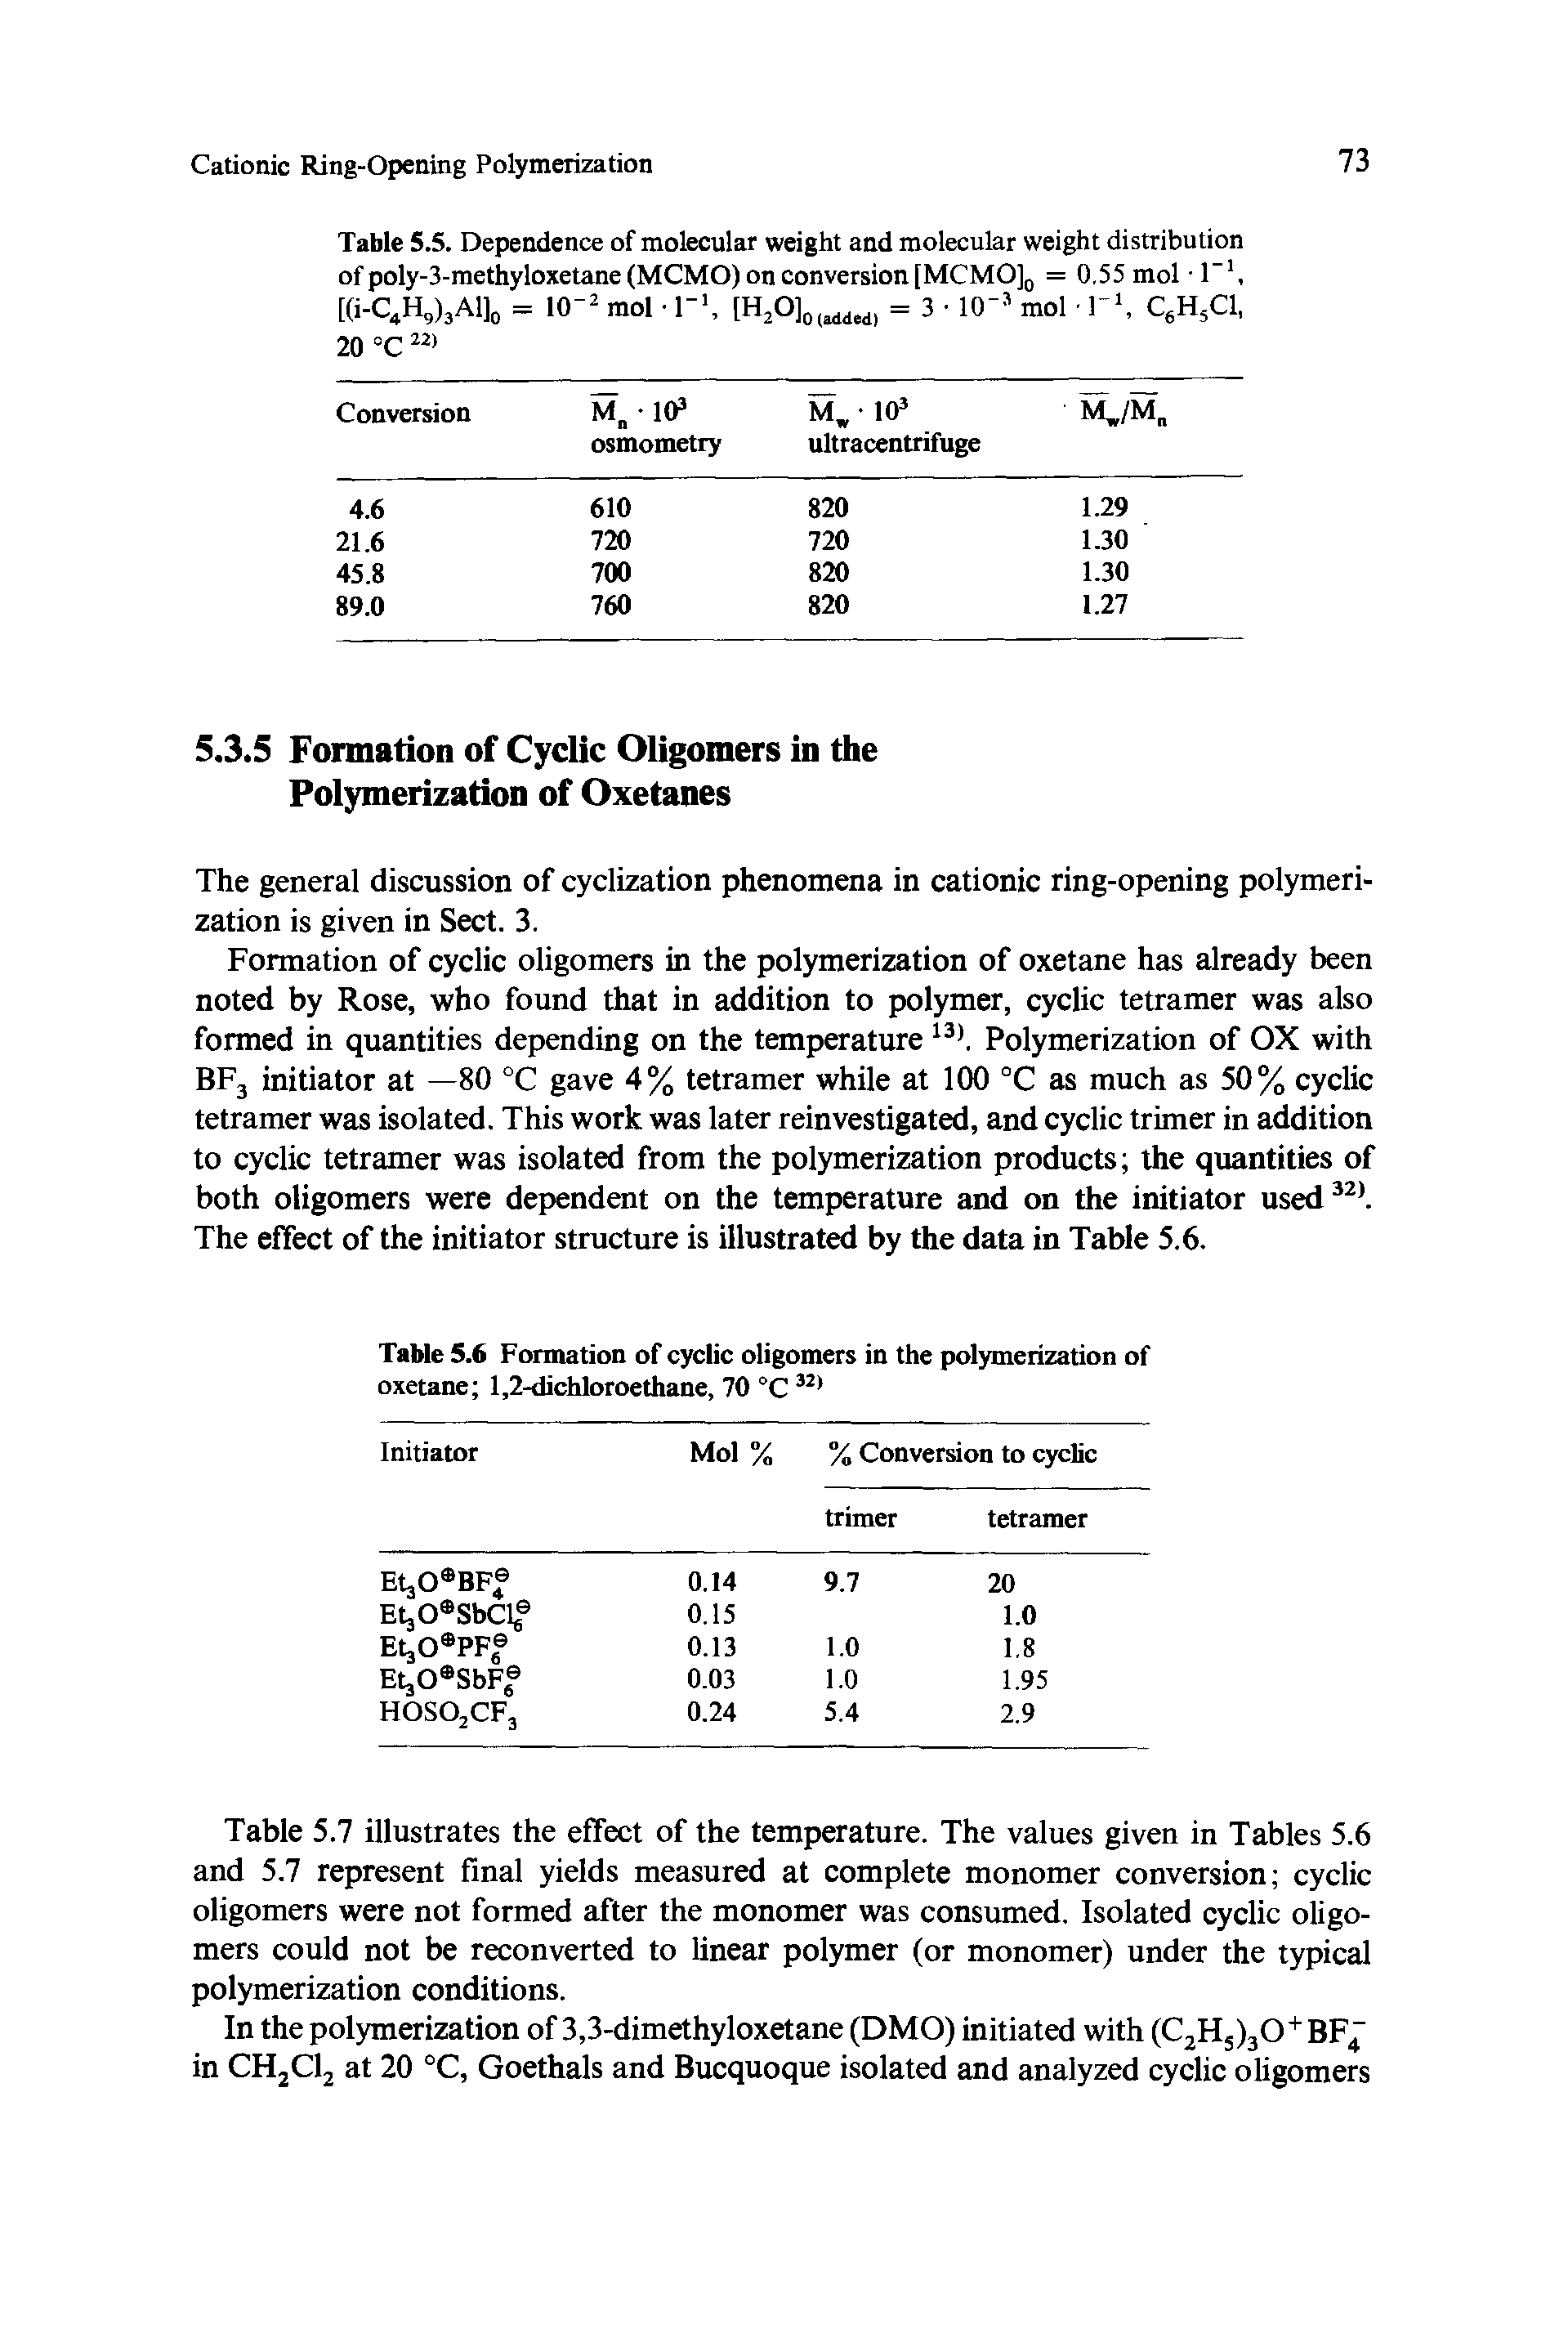 Table 5.5. Dependence of molecular weight and molecular weight distribution of poly-3-methyloxetane (MCMO) on conversion [MCMO]0 = 0.55 mol l 1, [(i-C4H9)3Al]0 = 10-2 mol 1-, [H2O]0(ldded) = 3 10 5 mol l1, C6H5C1,...